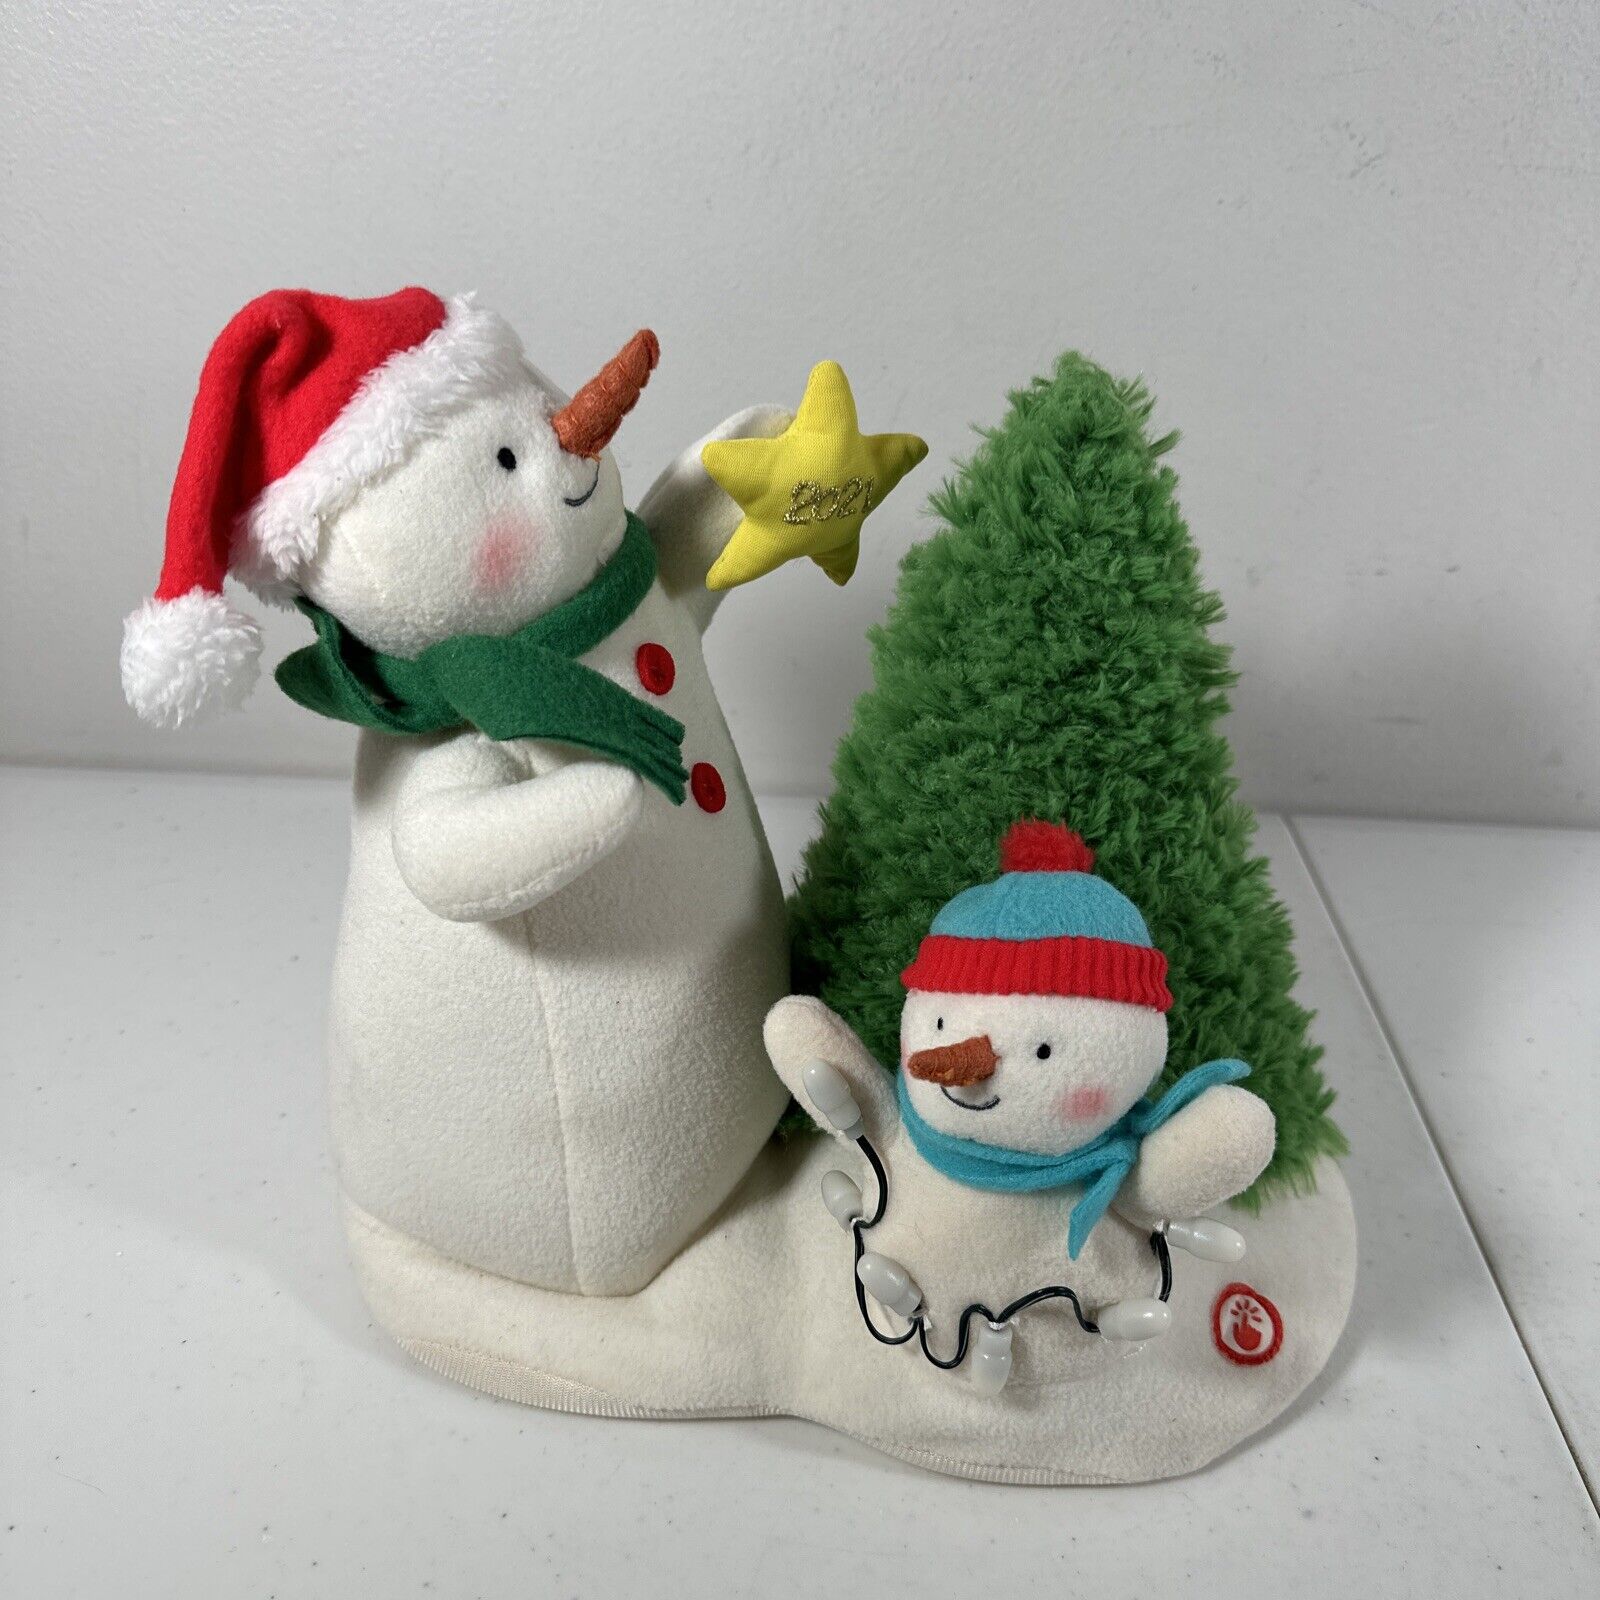 Tangled Up In Christmas Snowman 2021 Hallmark Jingle Pals Animated Tested Works